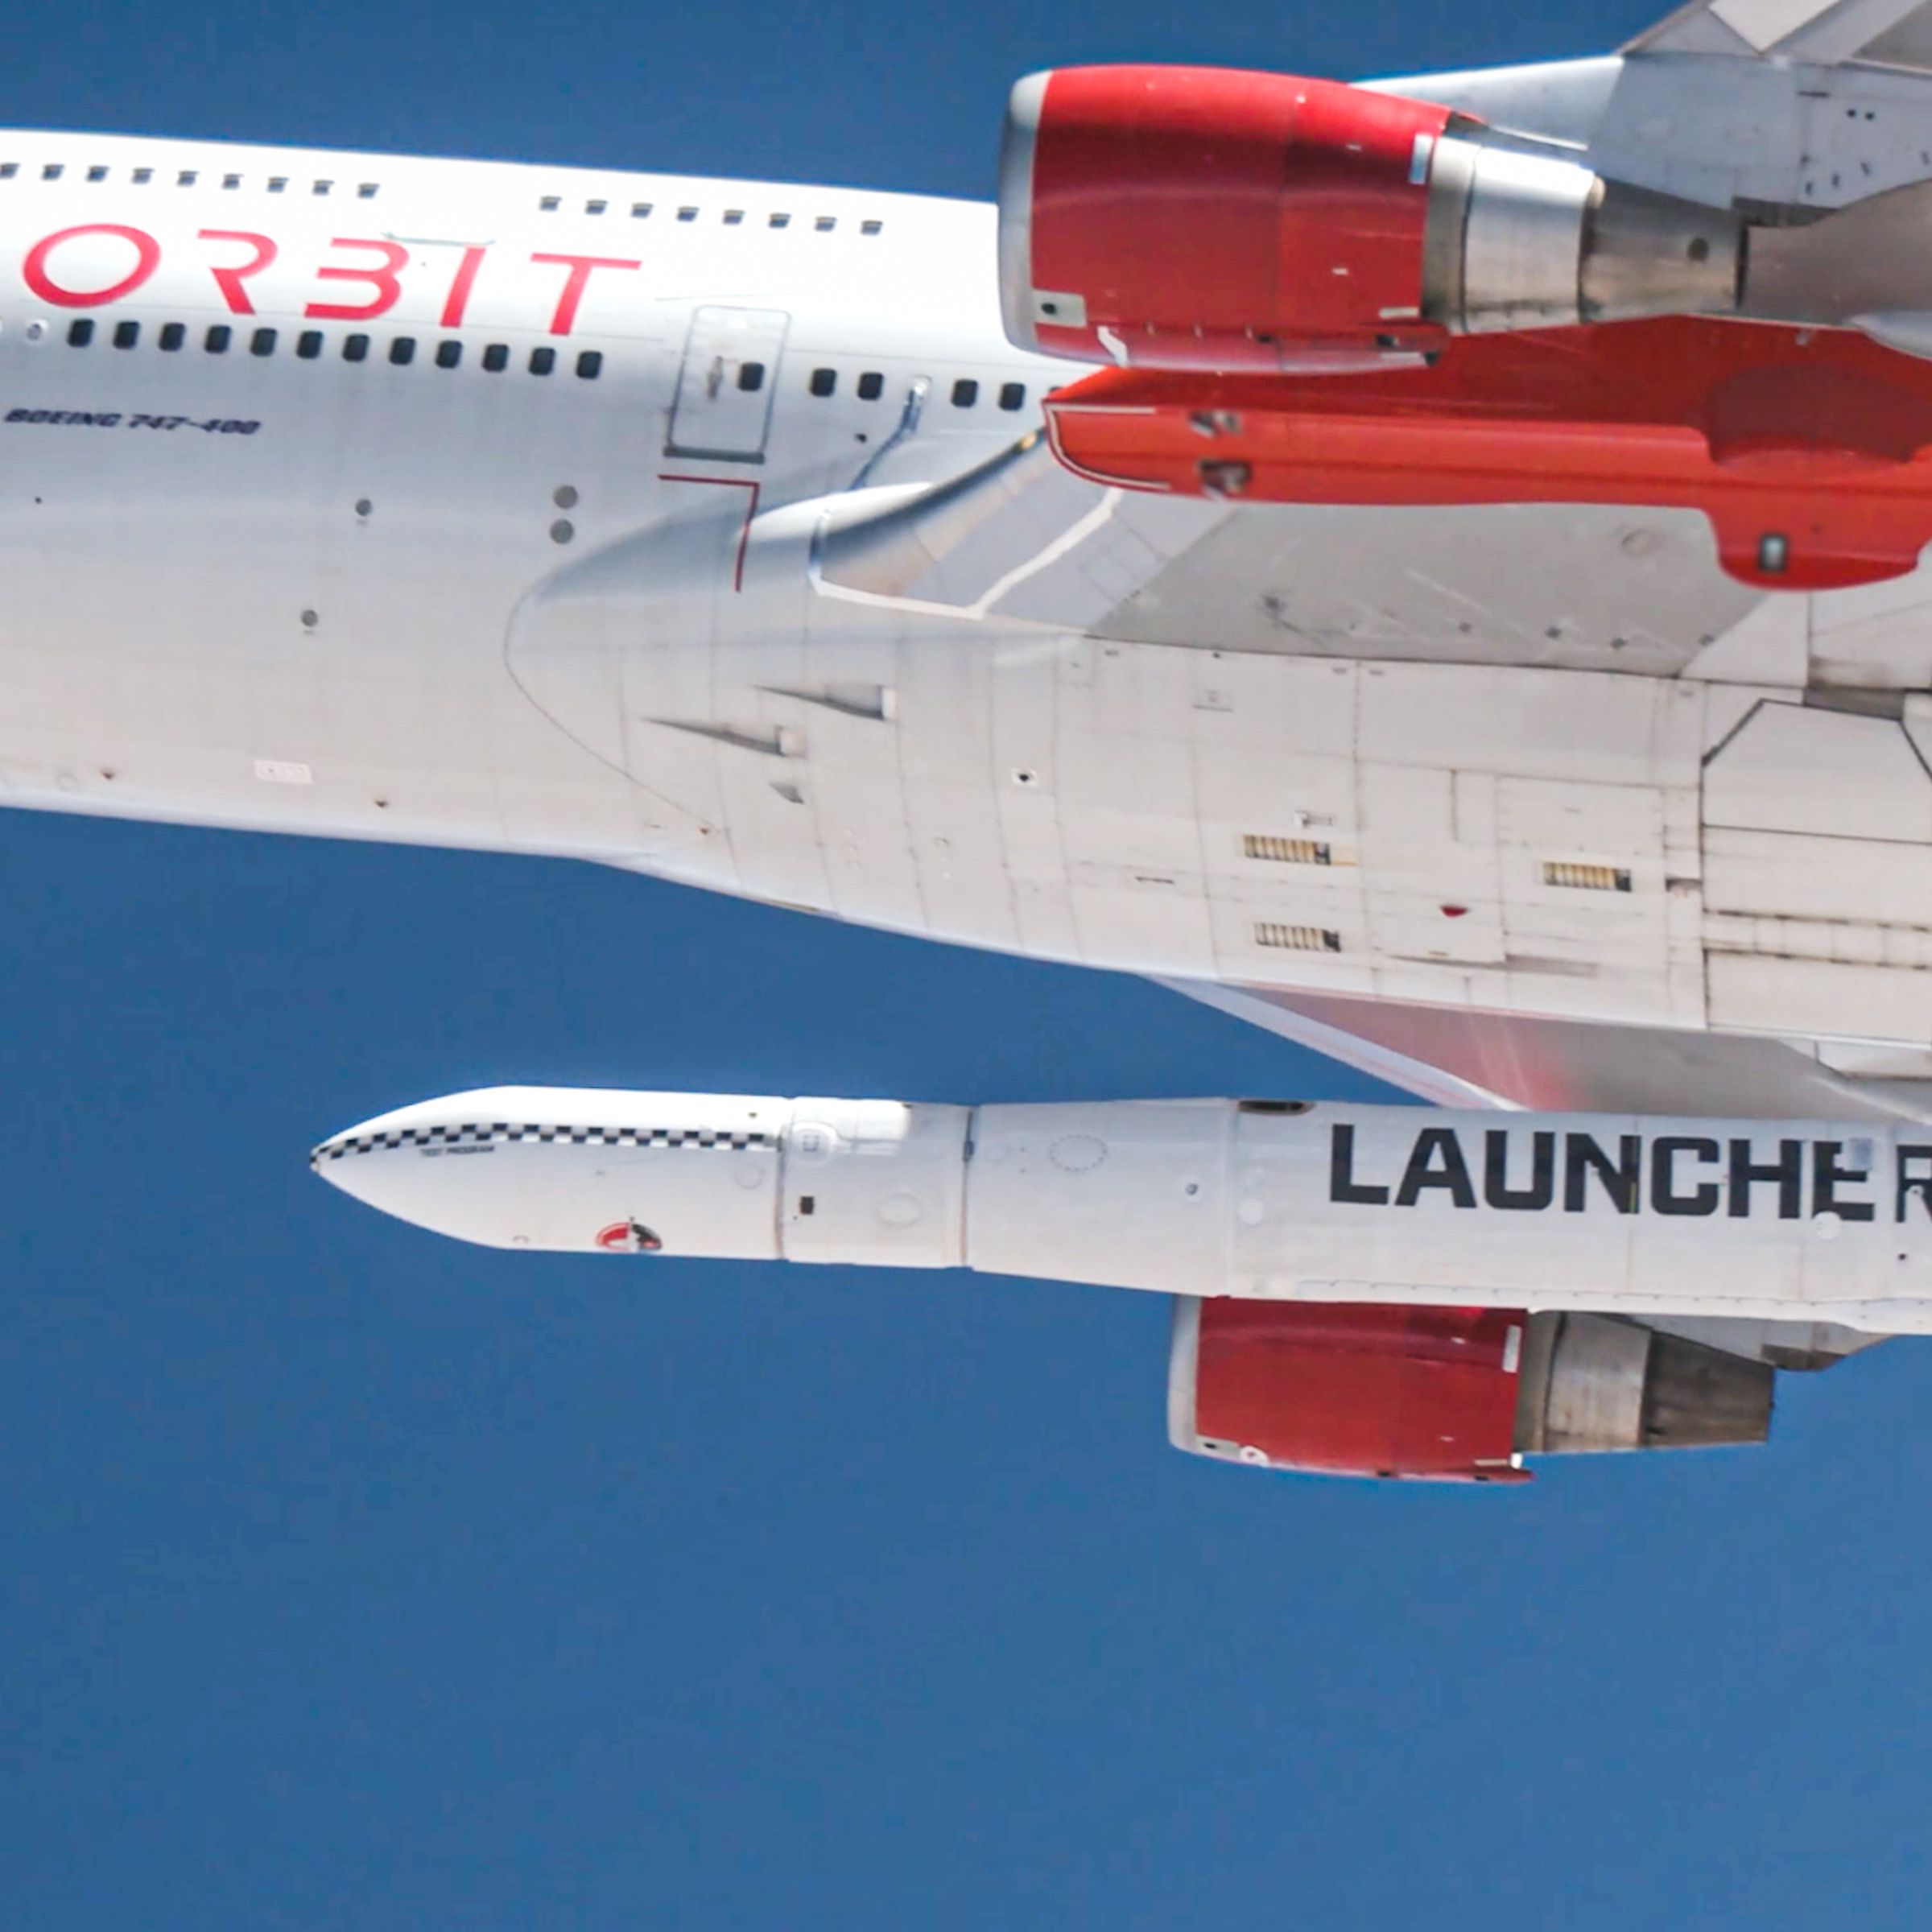 Virgin Orbit’s airborne rocket-launching system during a previous test.